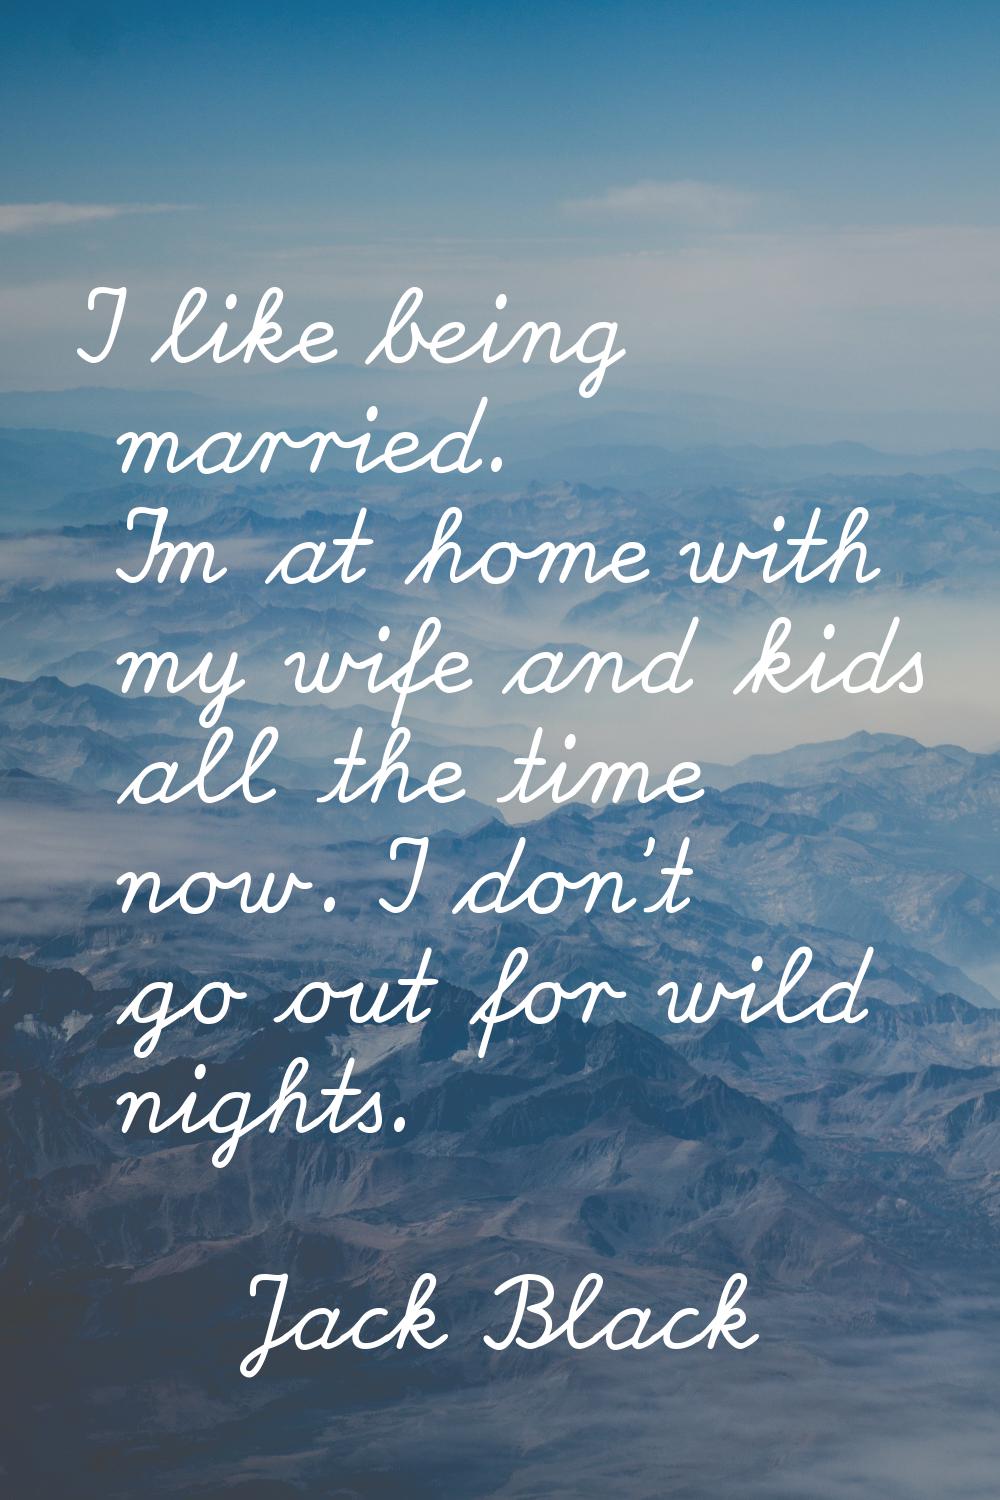 I like being married. I'm at home with my wife and kids all the time now. I don't go out for wild n